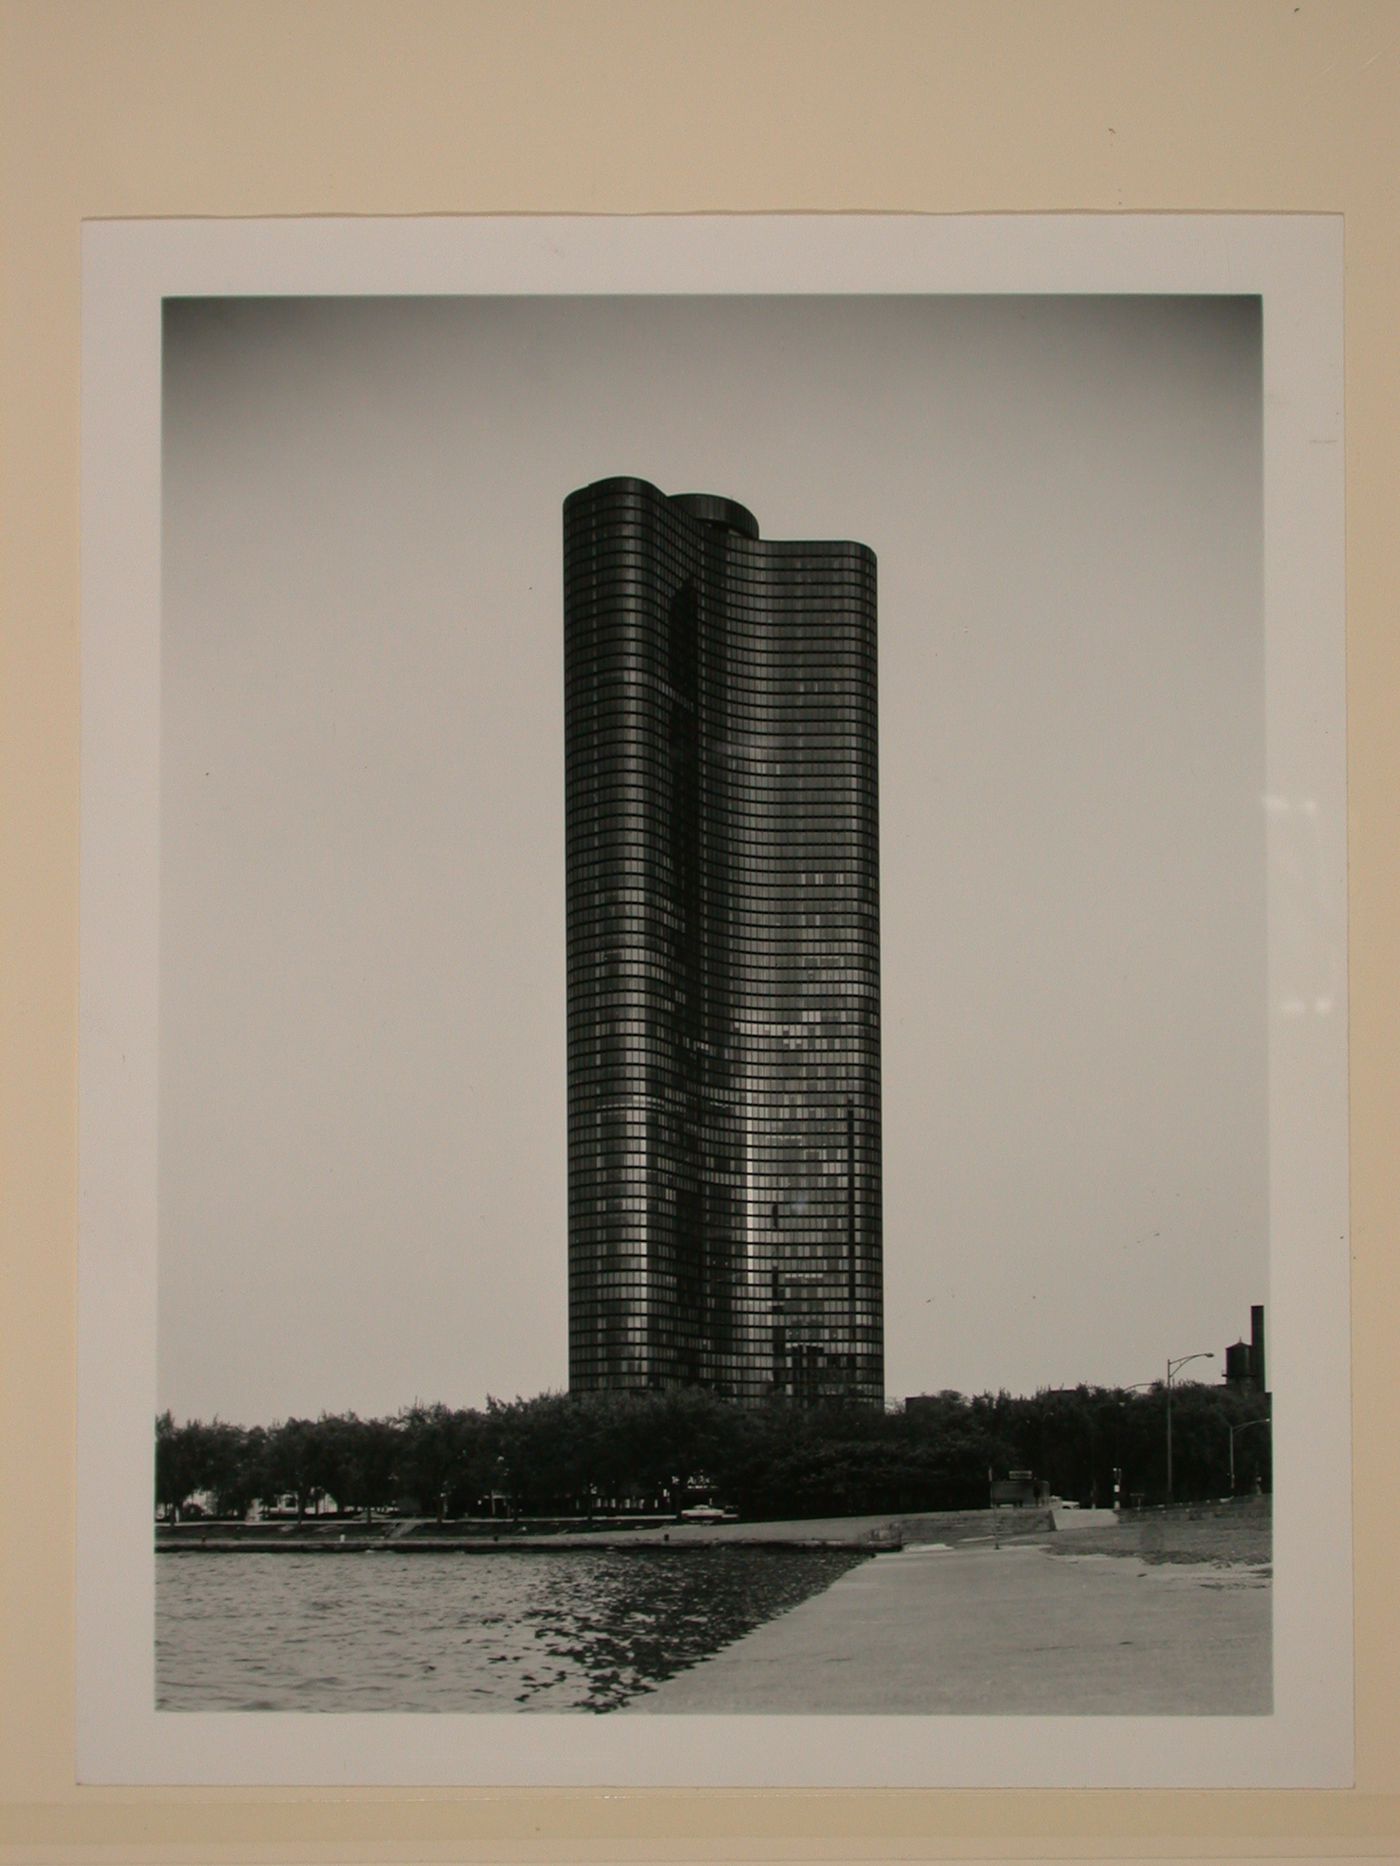 Distant view of Lake Point Tower, 505 North Lake Shore Drive, Chicago